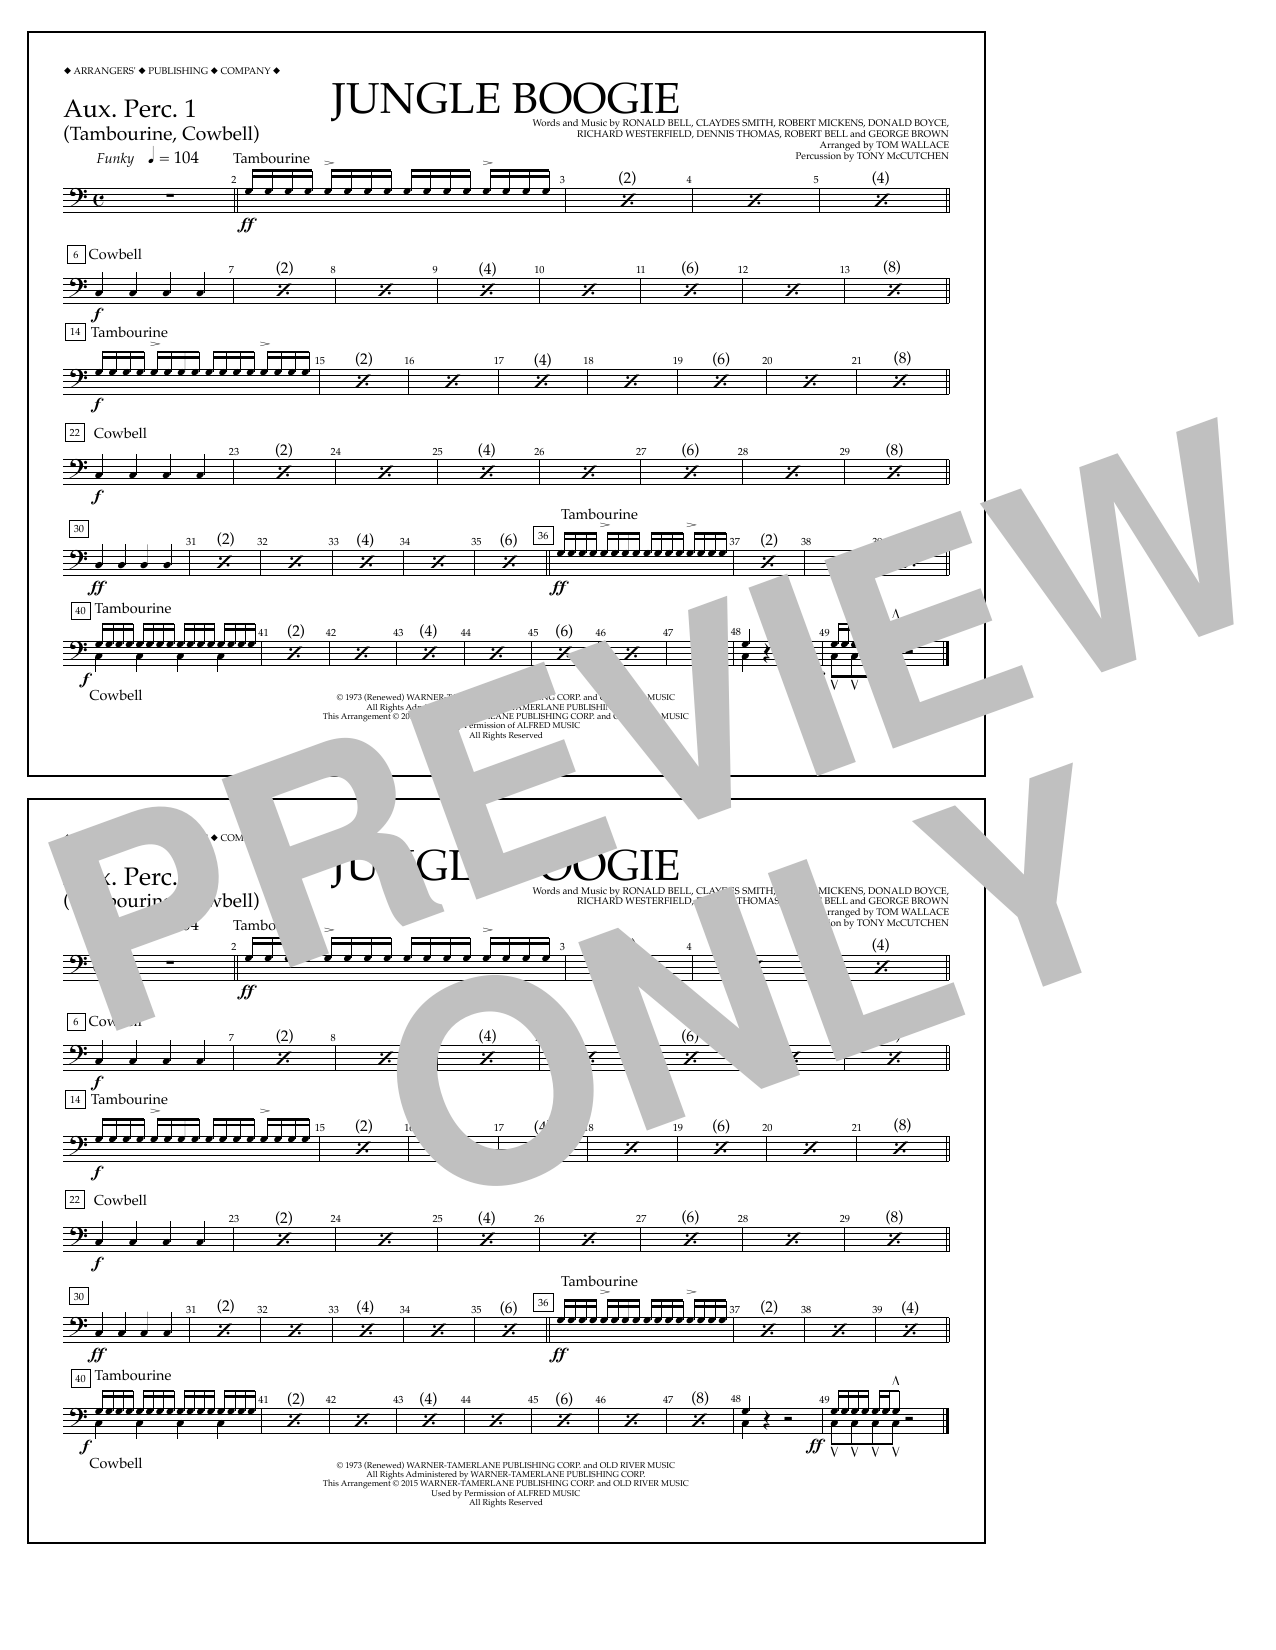 Download Tom Wallace Jungle Boogie - Aux. Perc. 1 Sheet Music